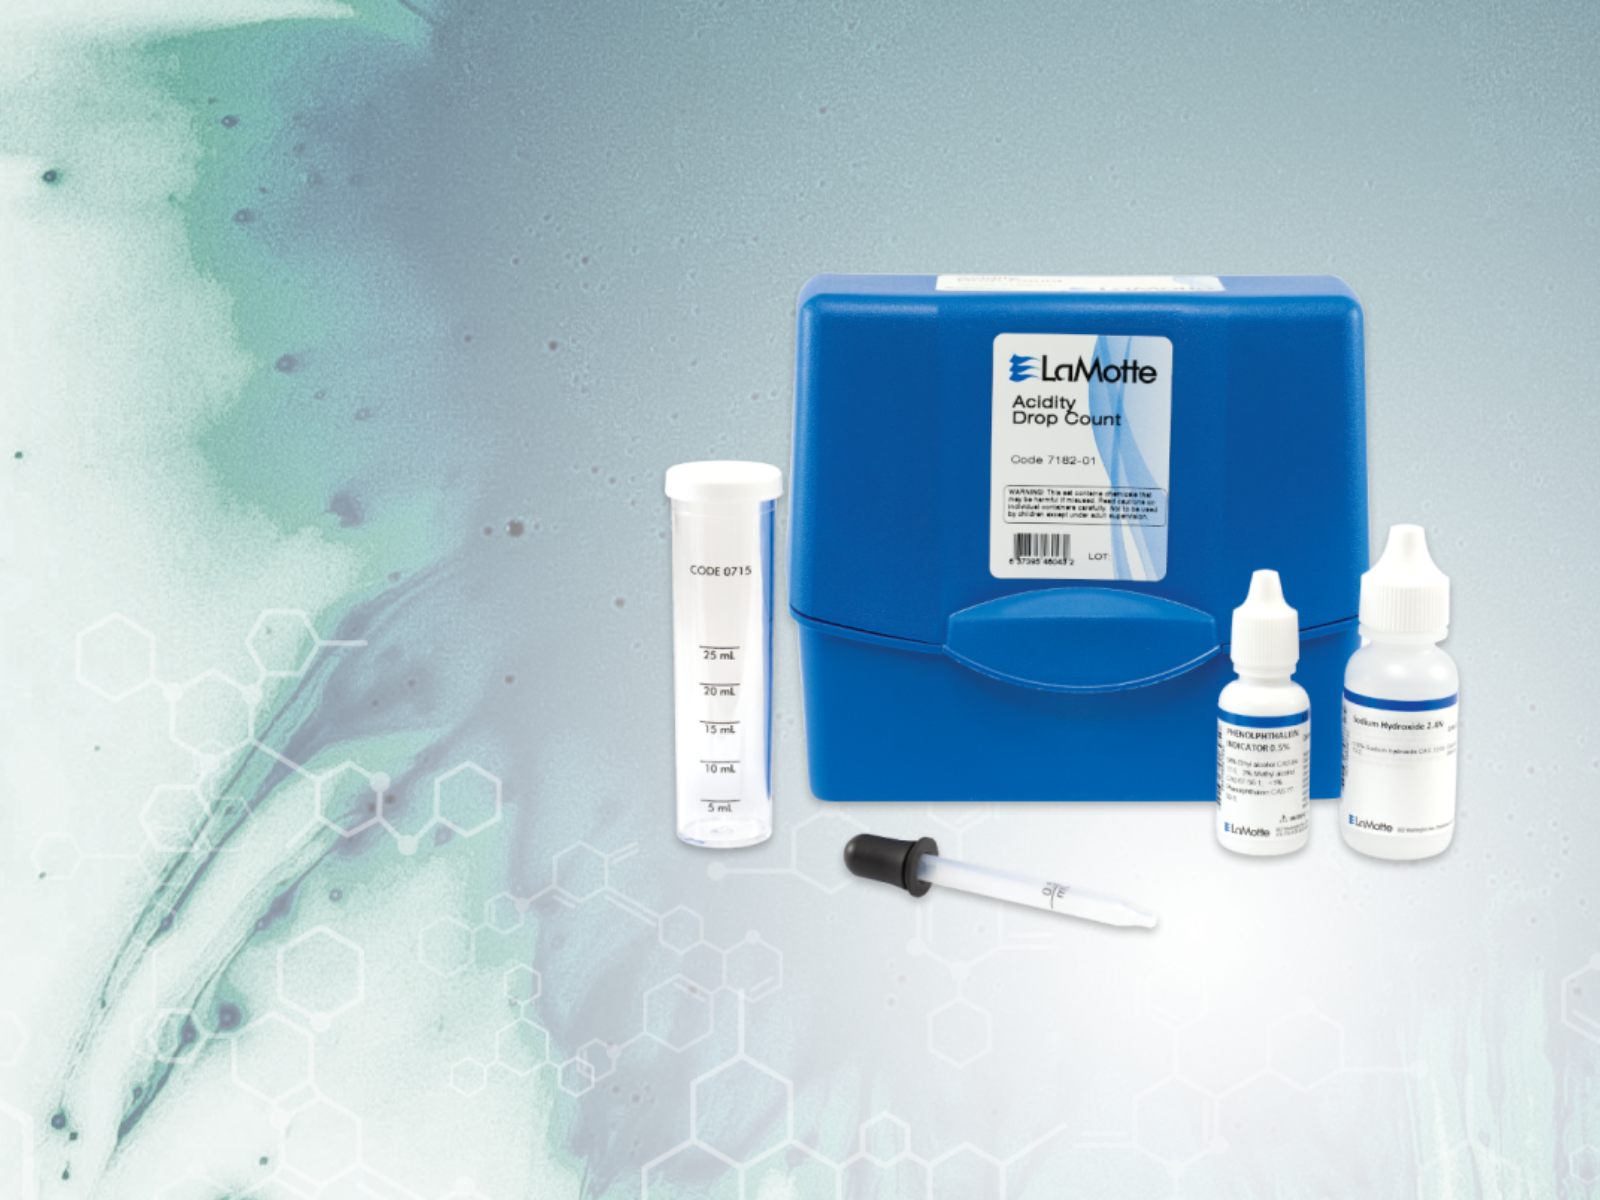 Discover Precise Acidic Content with LaMotte Acidity Test Kit